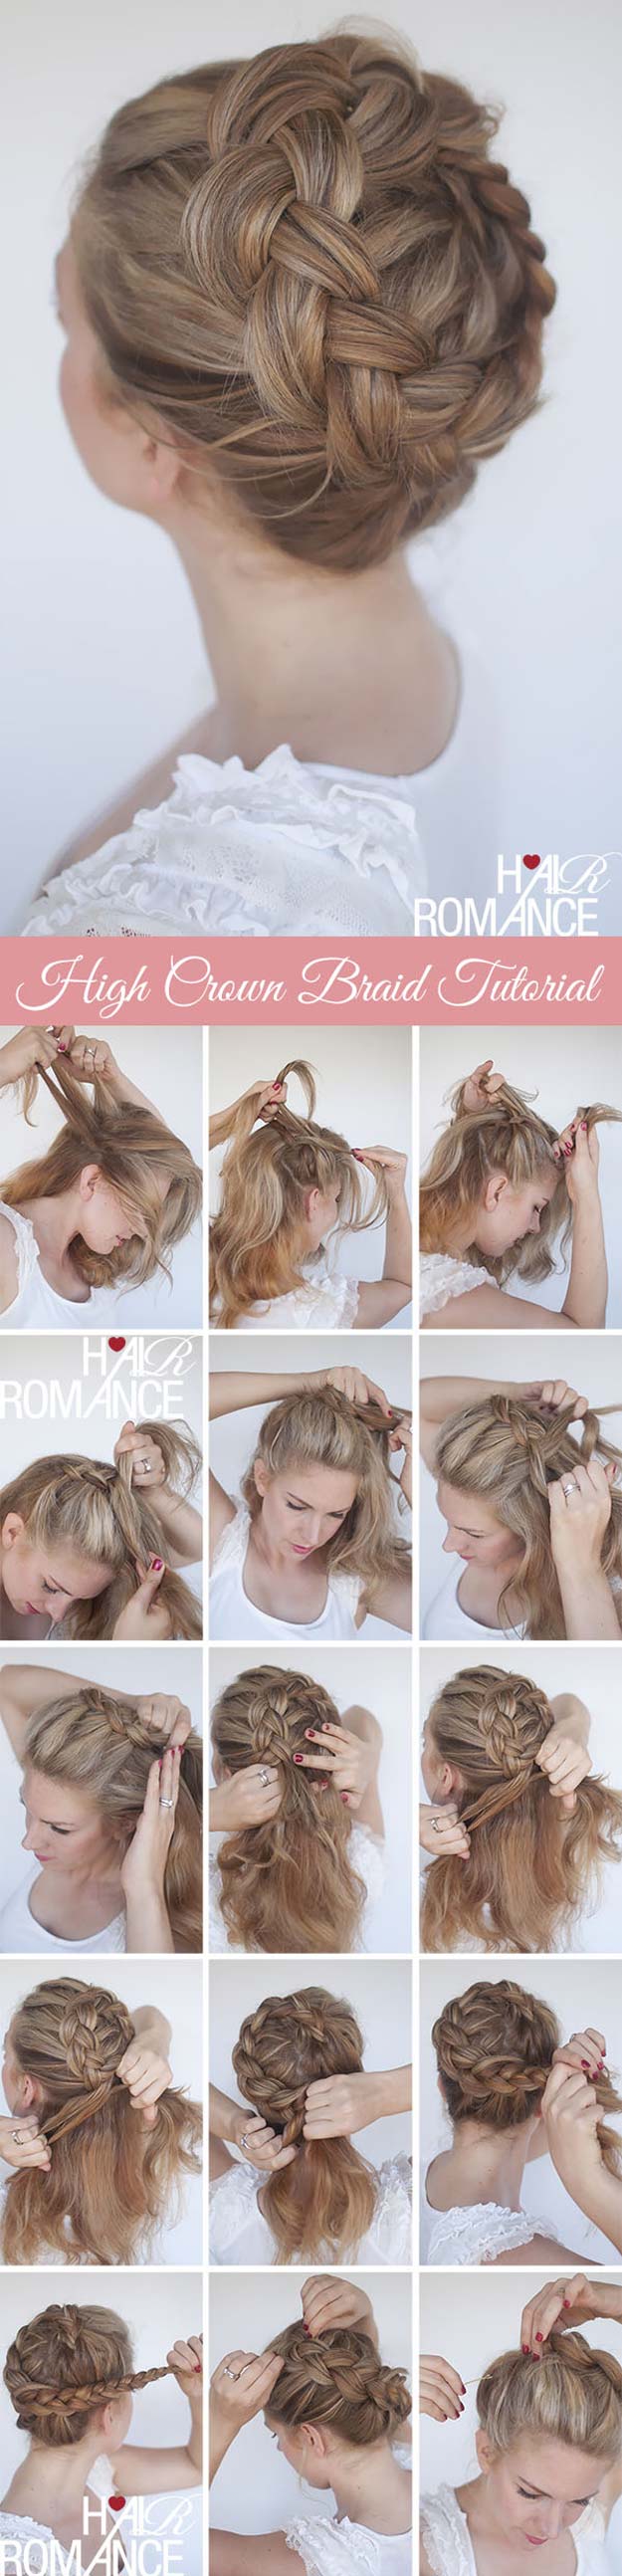 Best Hair Braiding Tutorials - High Braided Crown Tutorial - Easy Step by Step Tutorials for Braids - How To Braid Fishtail, French Braids, Flower Crown, Side Braids, Cornrows, Updos - Cool Braided Hairstyles for Girls, Teens and Women - School, Day and Evening, Boho, Casual and Formal Looks #hairstyles #braiding #braidingtutorials #diyhair 